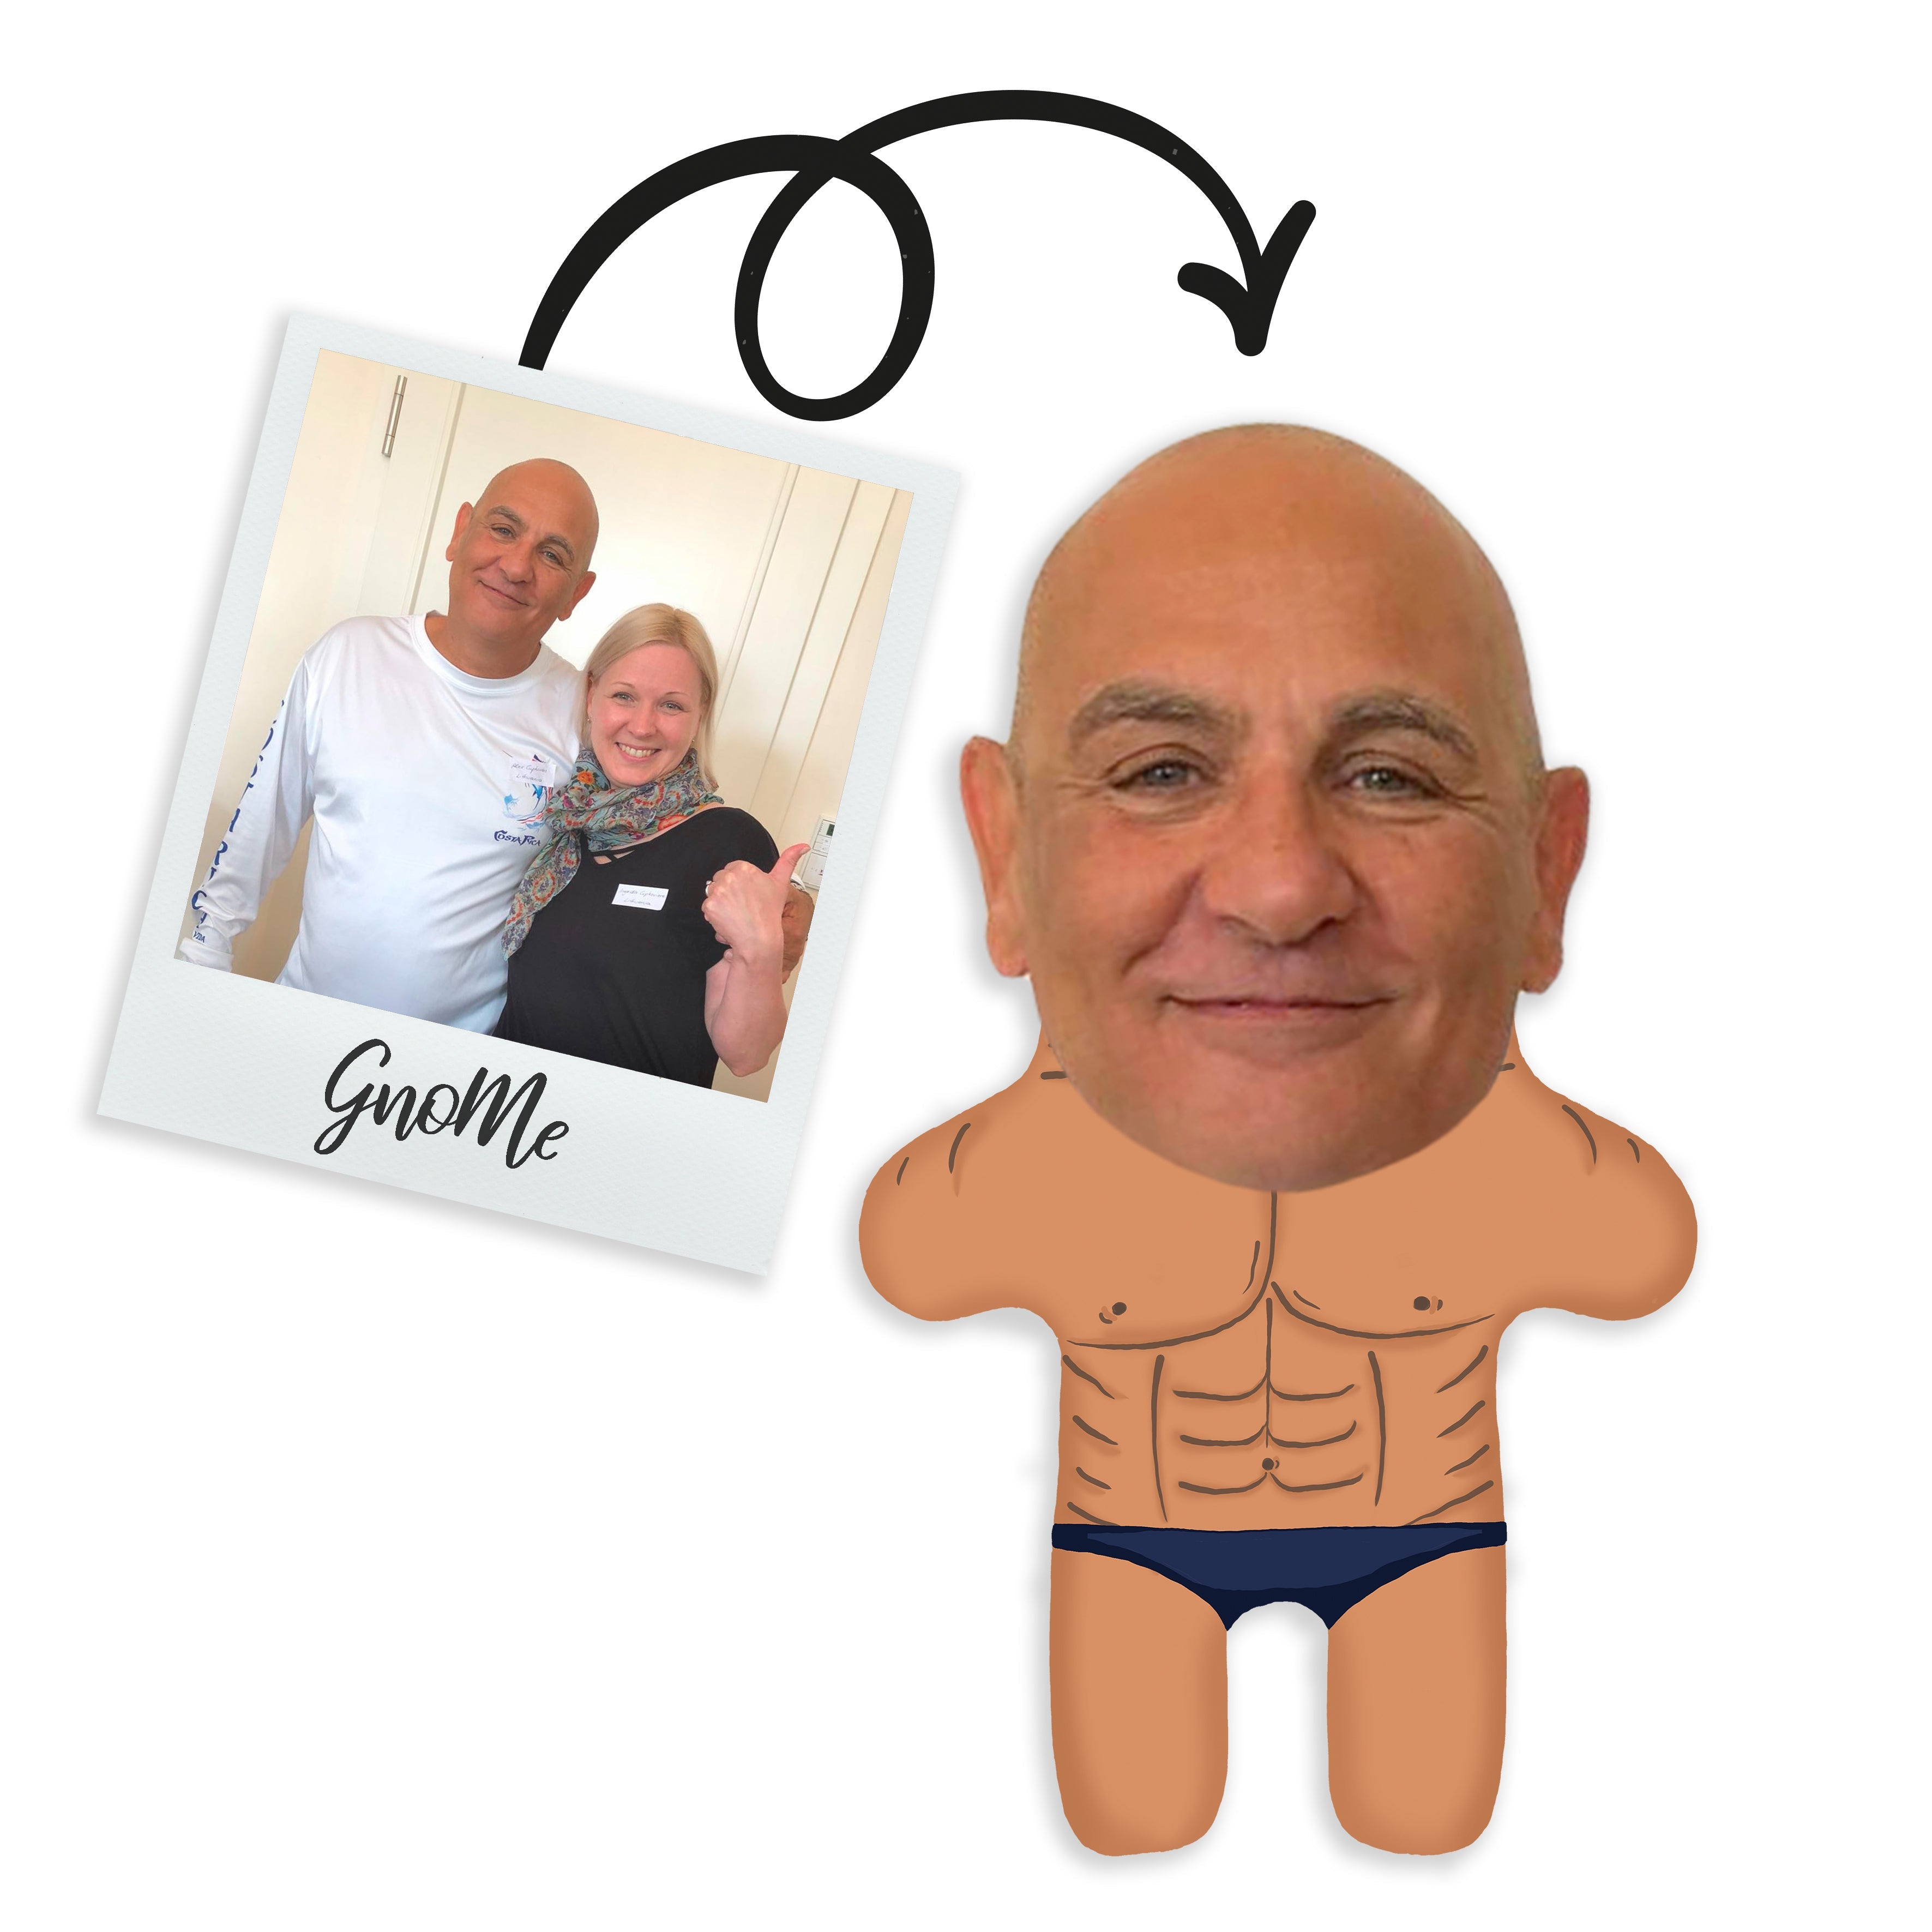 Gnome cushion with your photo "Bodybuilder"